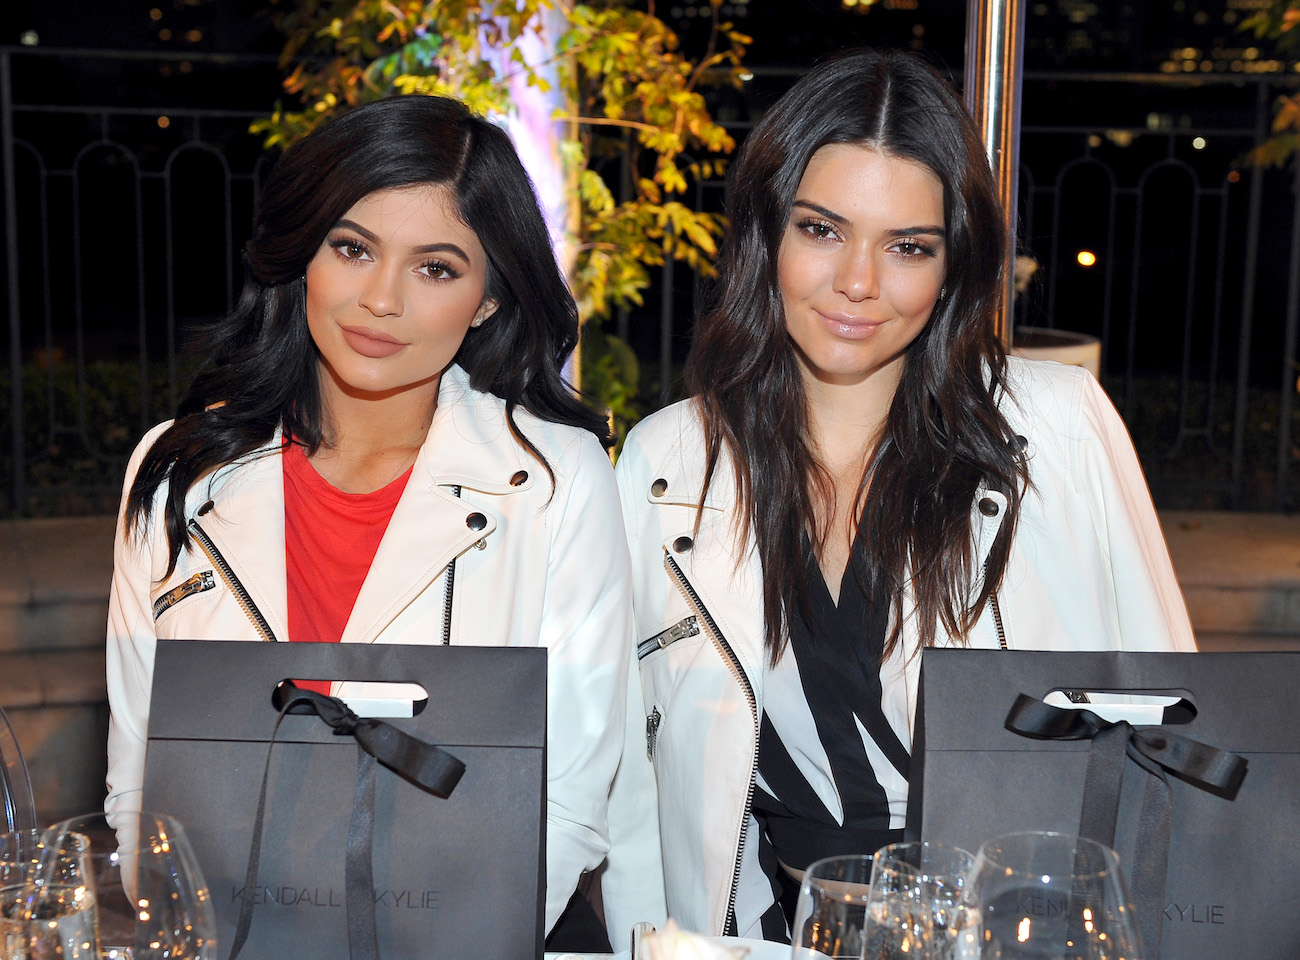 Kendall and Kylie Jenner Get Advice from Godmother Kathie Lee Gifford ...